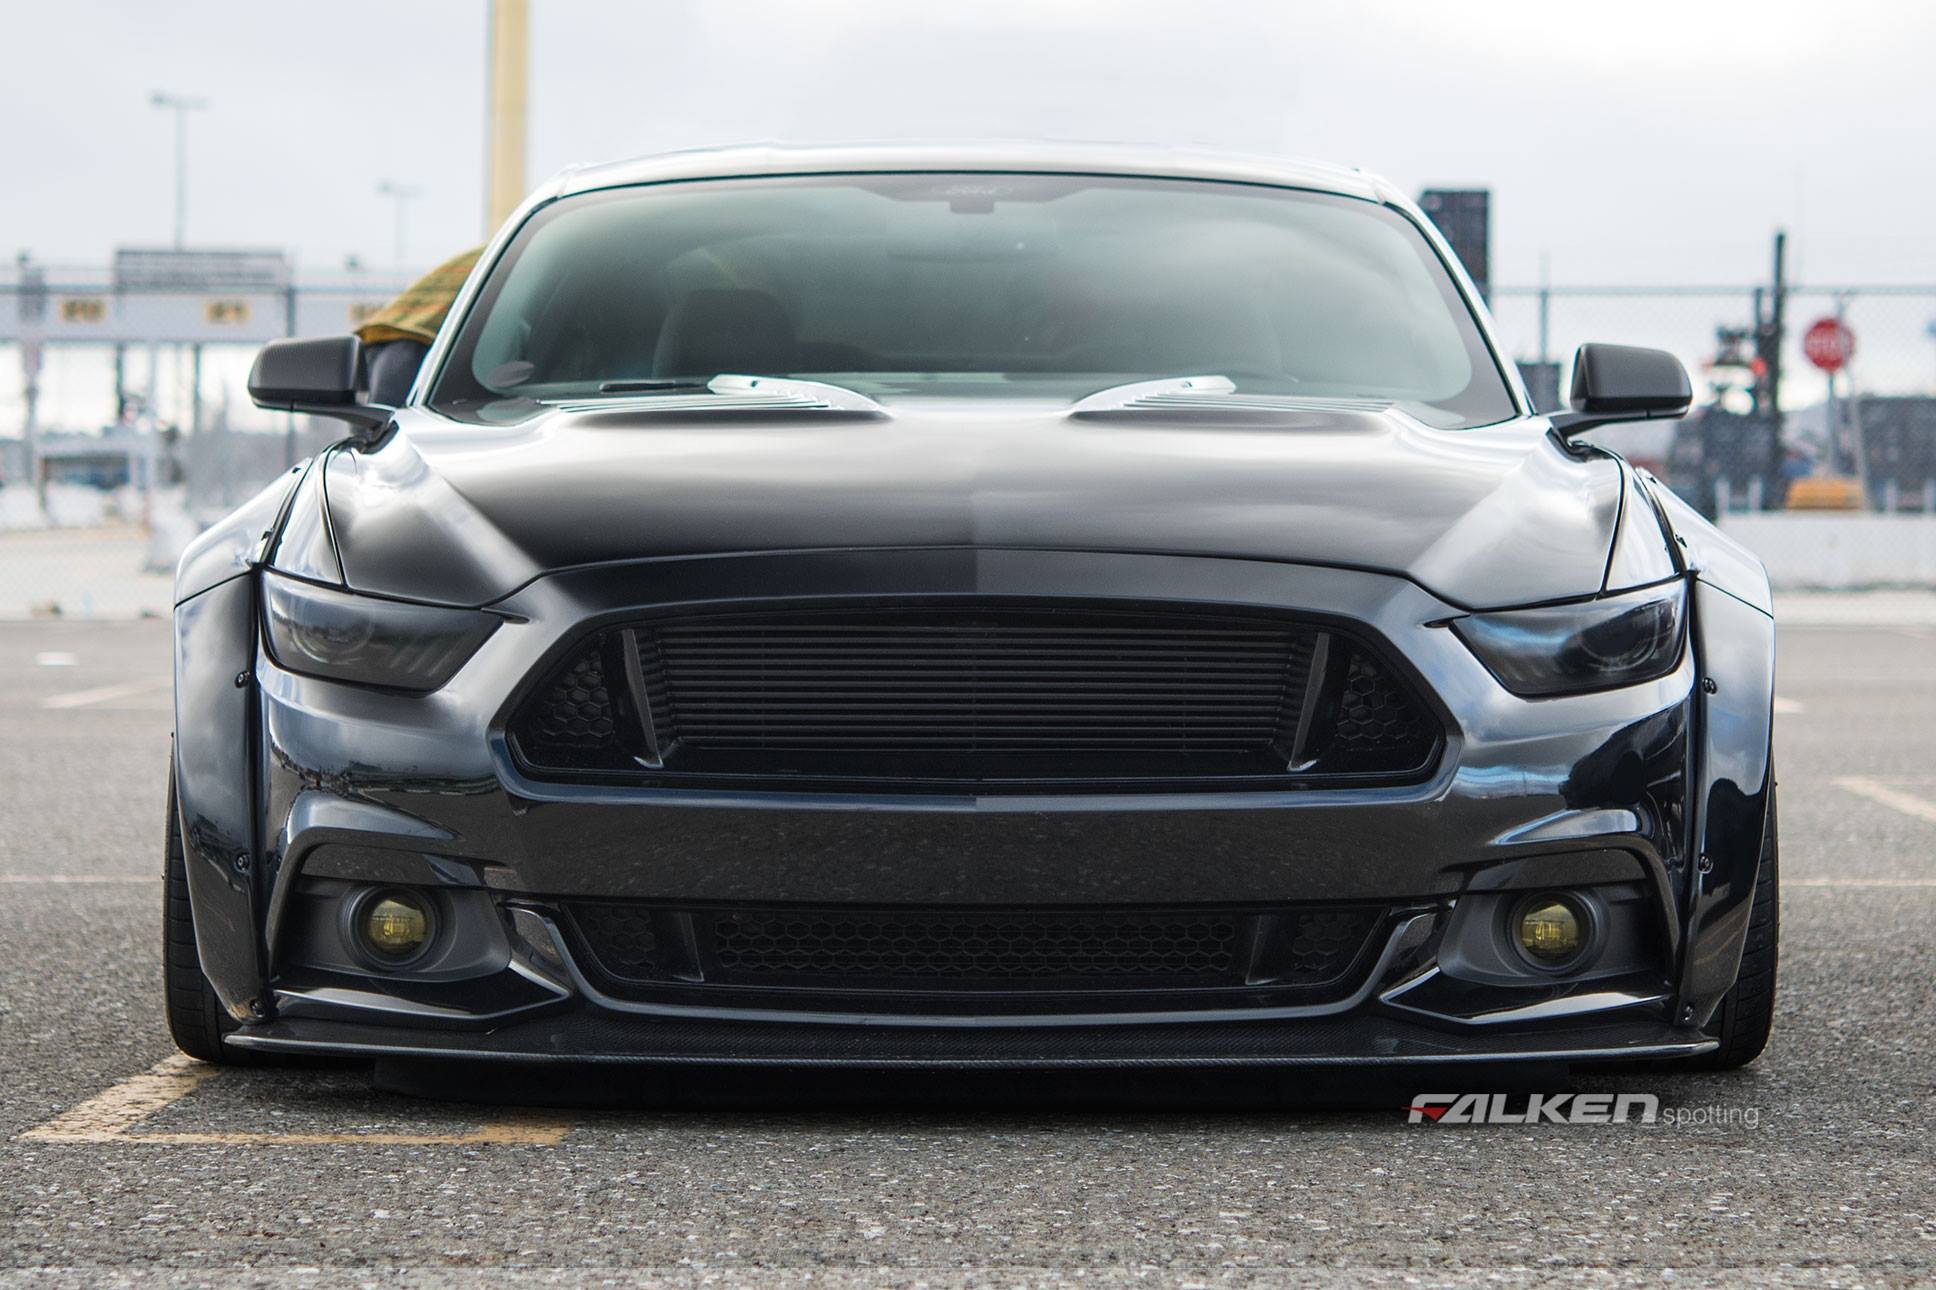 All Black Slammed Mustang GT with Widebody Fender Flares - Photo by Falken